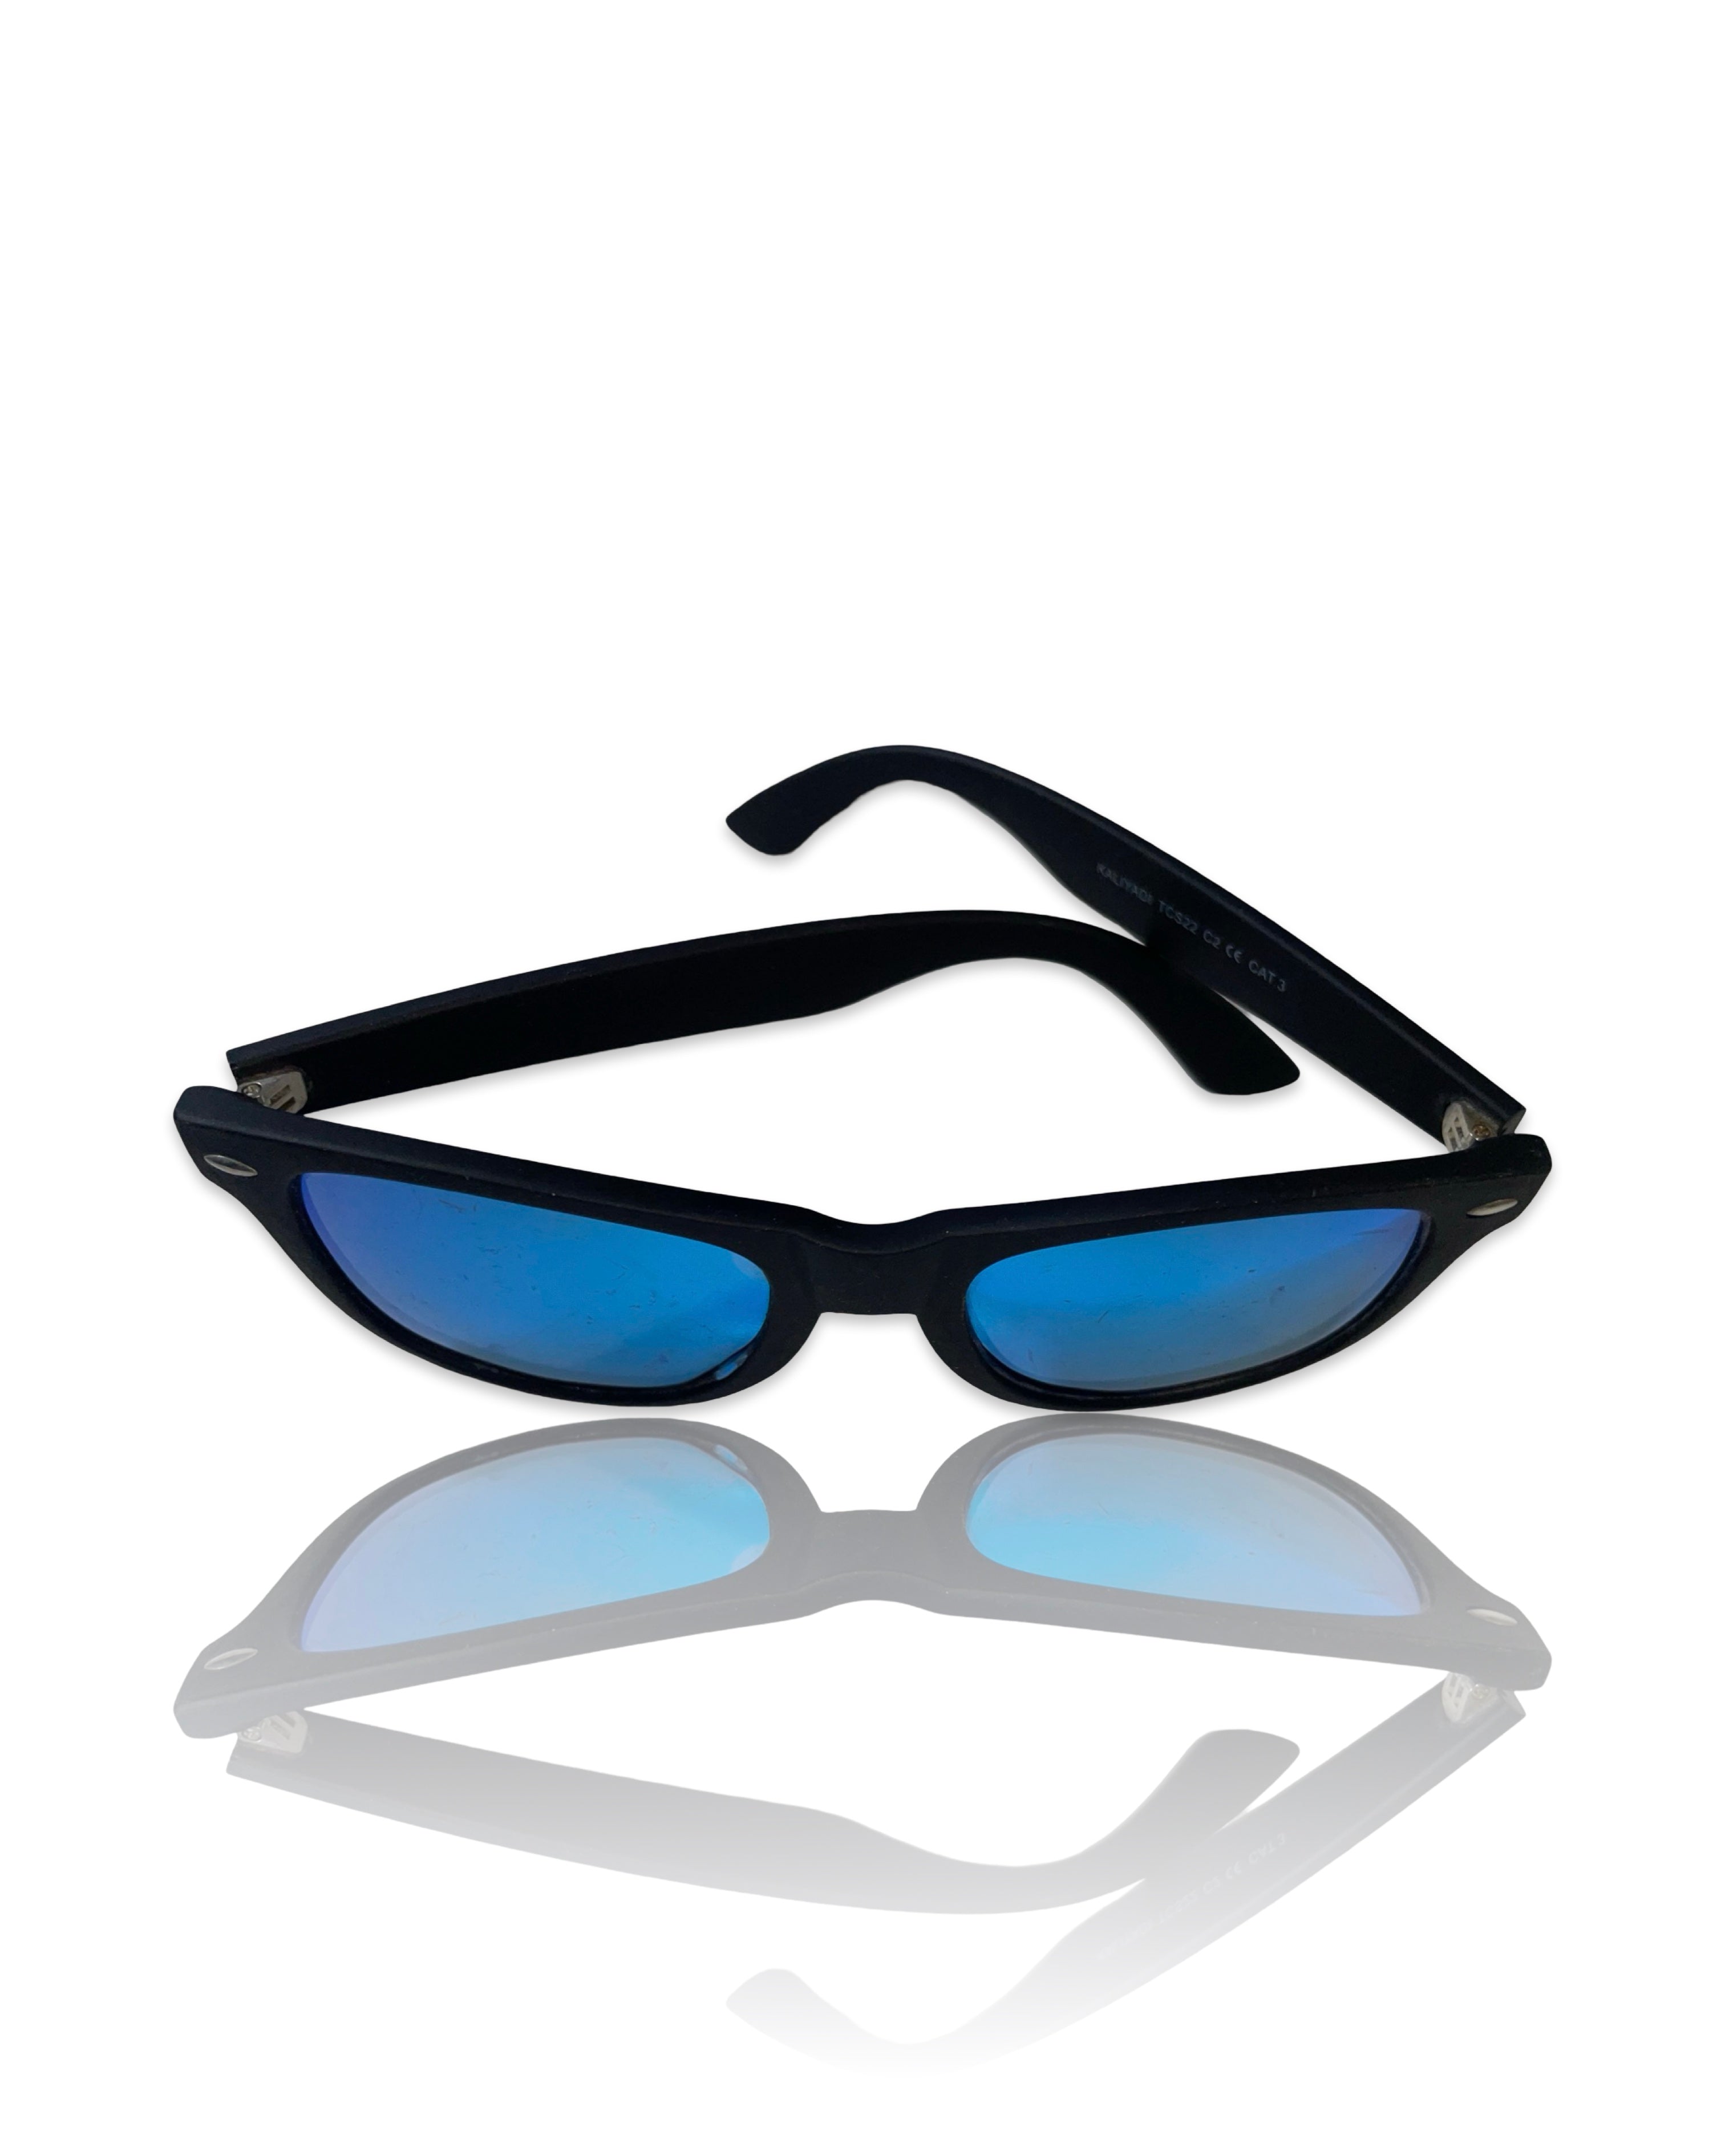 Unisex womens and Men's Blue and Navy Sunglasses|SKU 4208